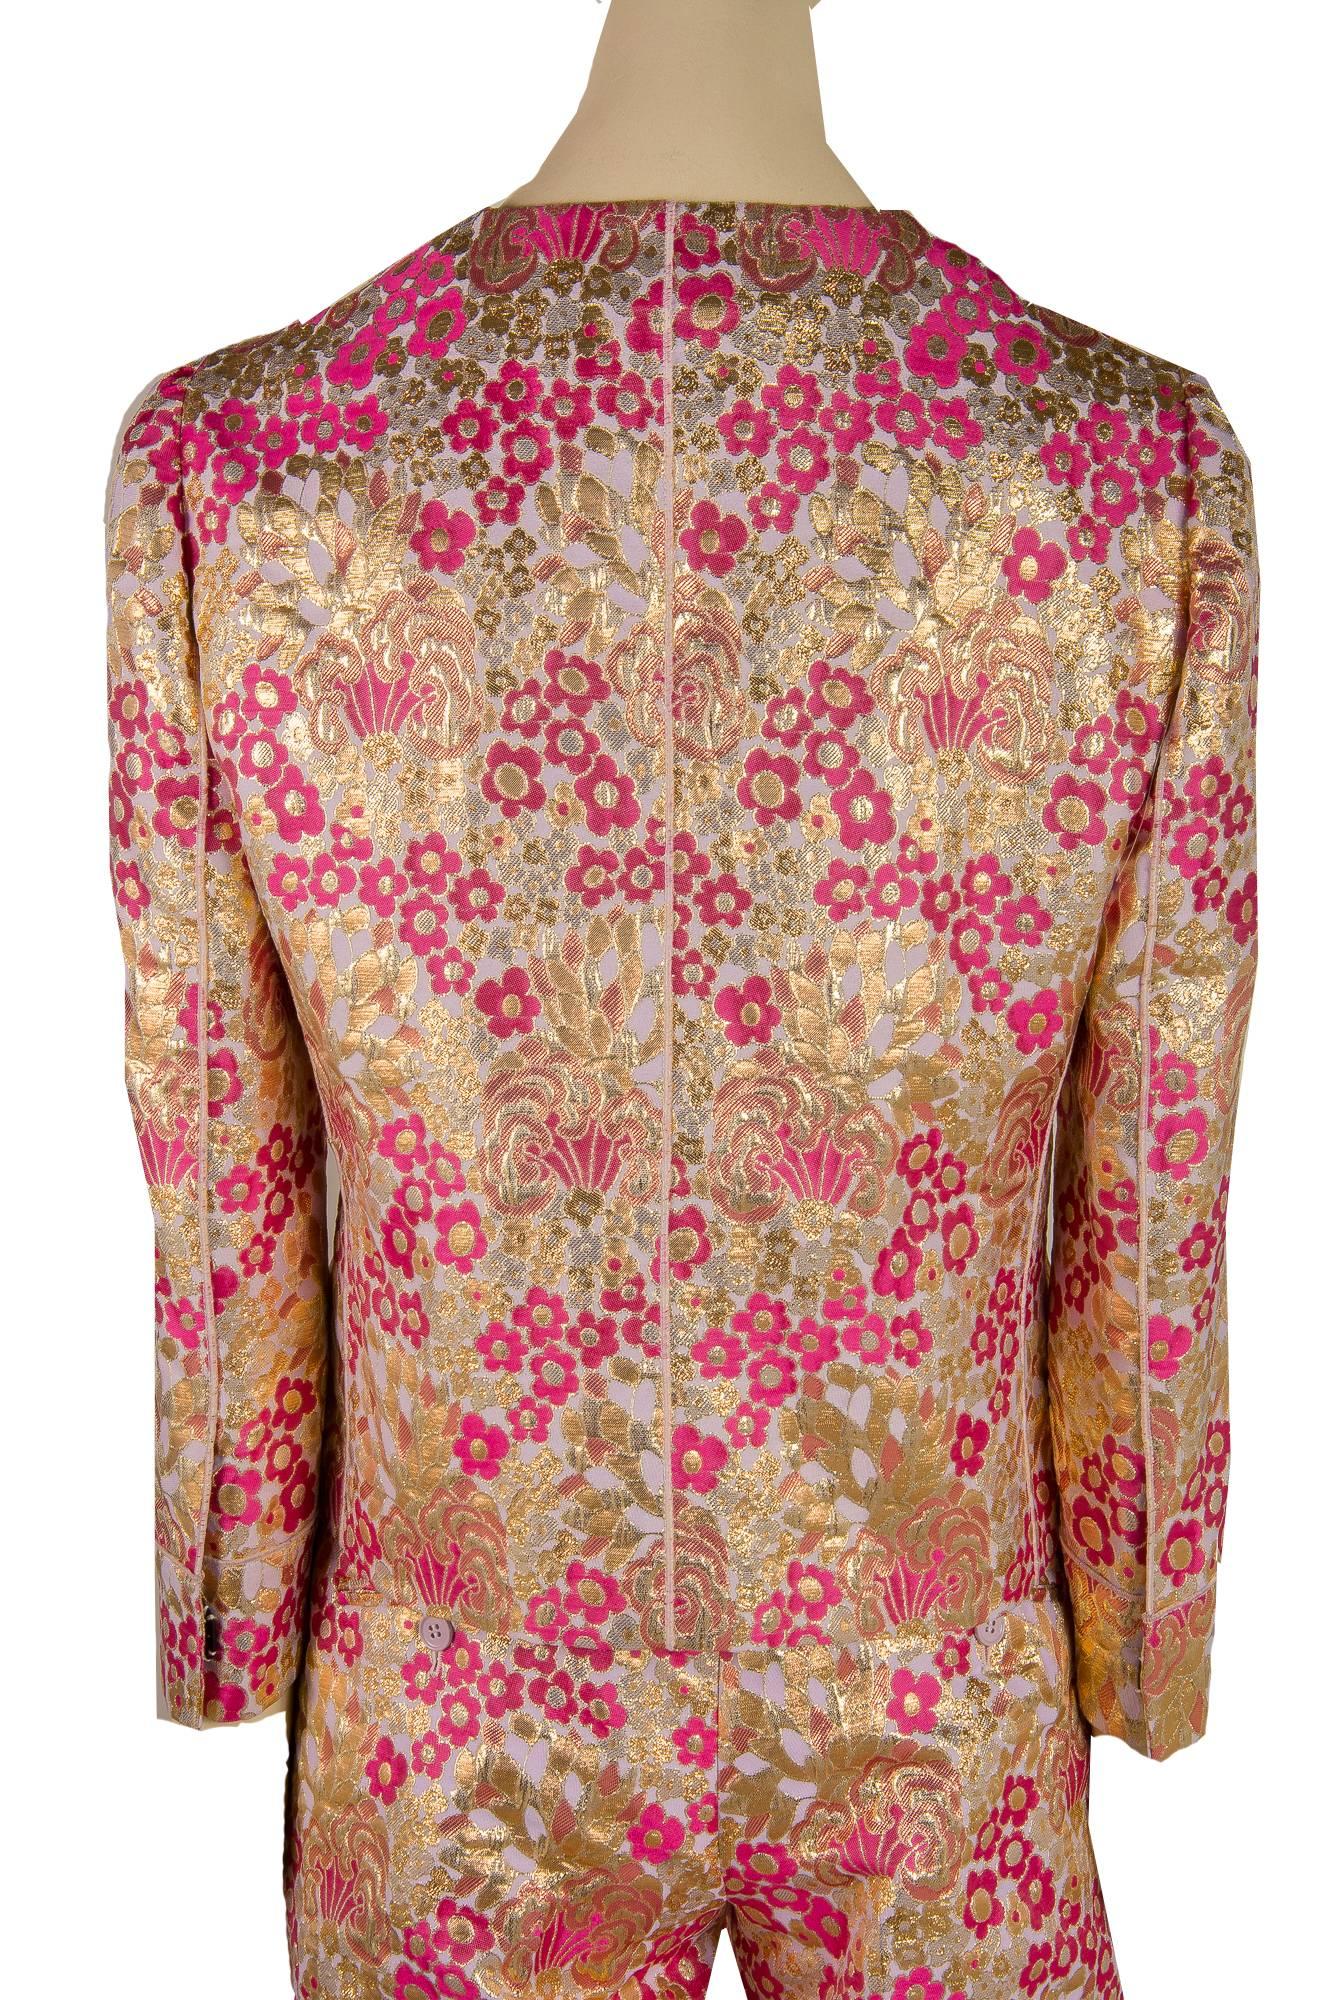 Presented here is a new Dolce and Gabbana button down jacket. The jacket is a size 38. The silk brocade fabric is absolutely magnificent and the fabric is woven threads of gold and light pink and magenta flowers throughout. The measurements for the